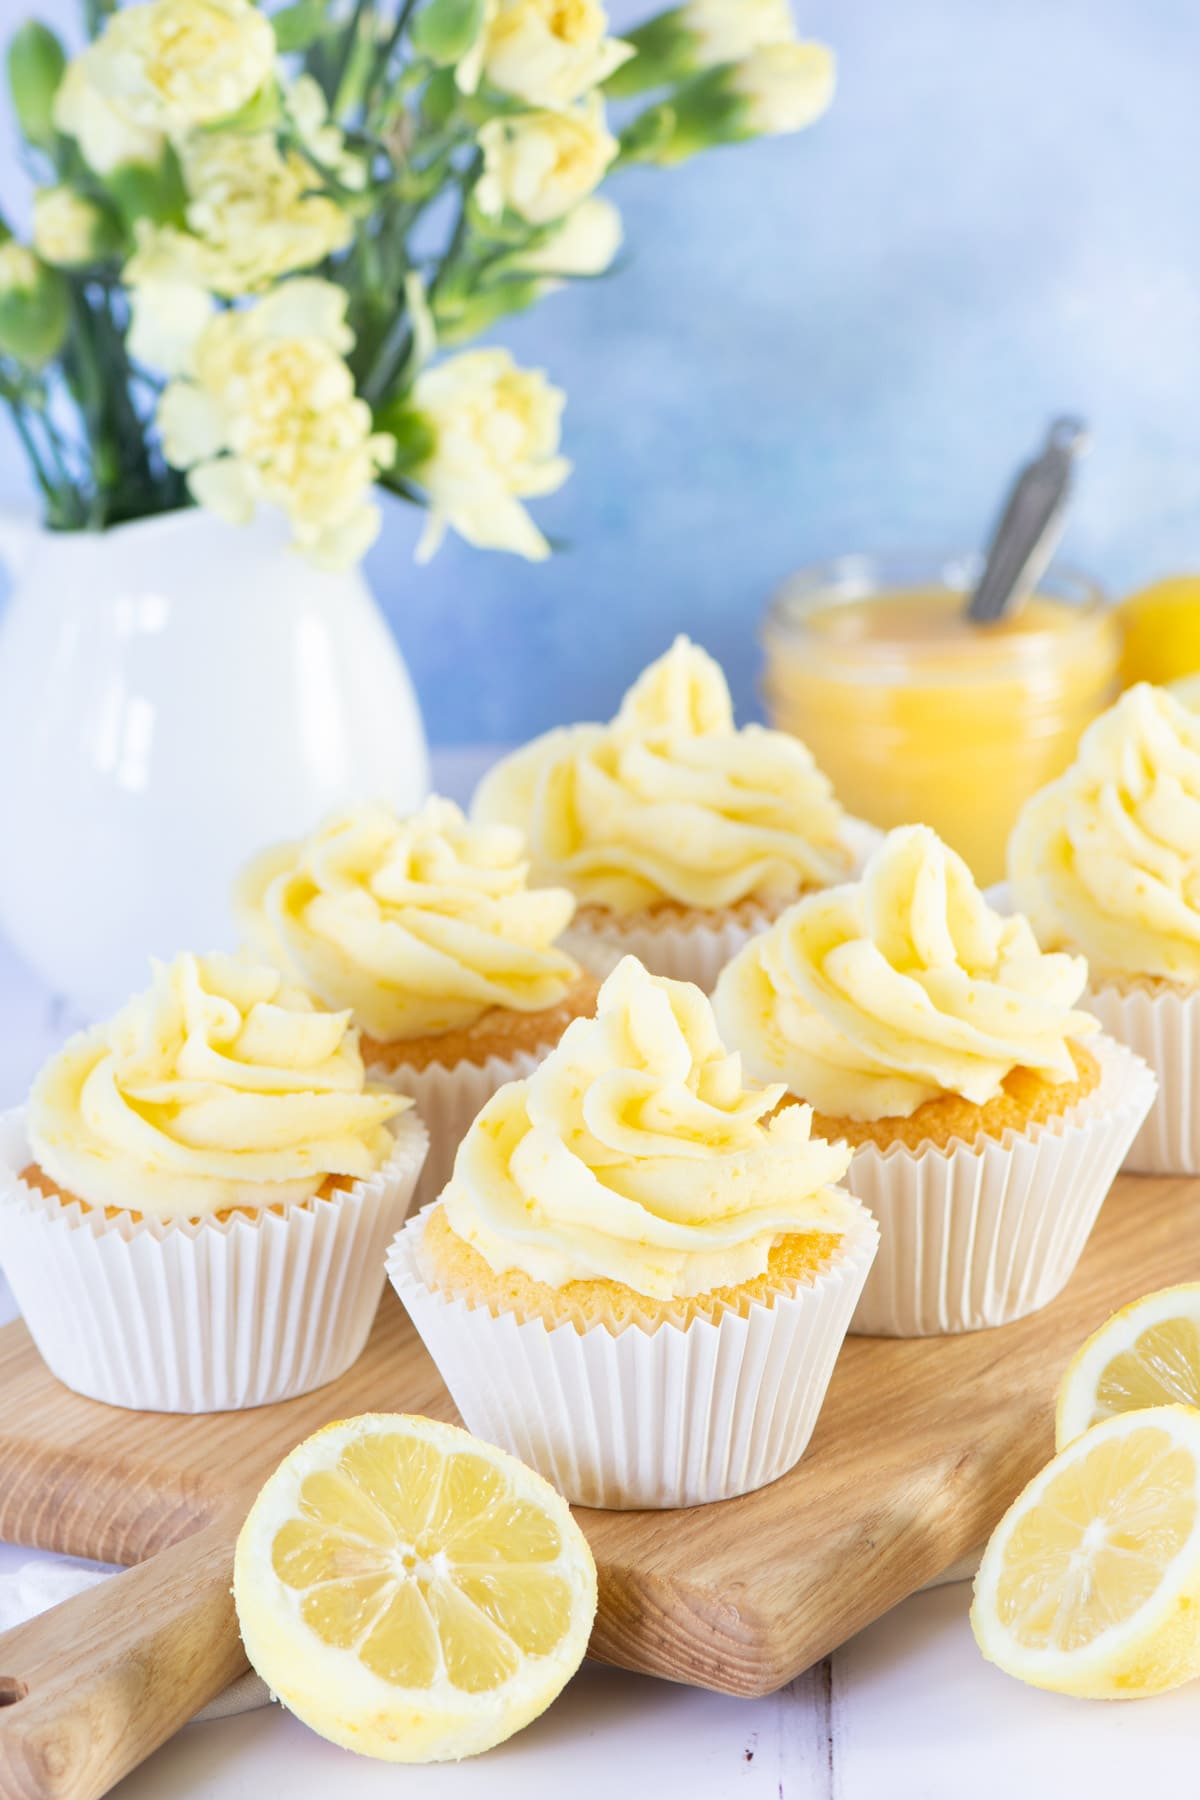 Two different versions of my delicious lemon buttercream - one made with fresh lemons (juice and zest) and another made with either lemon extract or oil. Perfect for decorating cakes and cupcakes or filling biscuits and macarons.